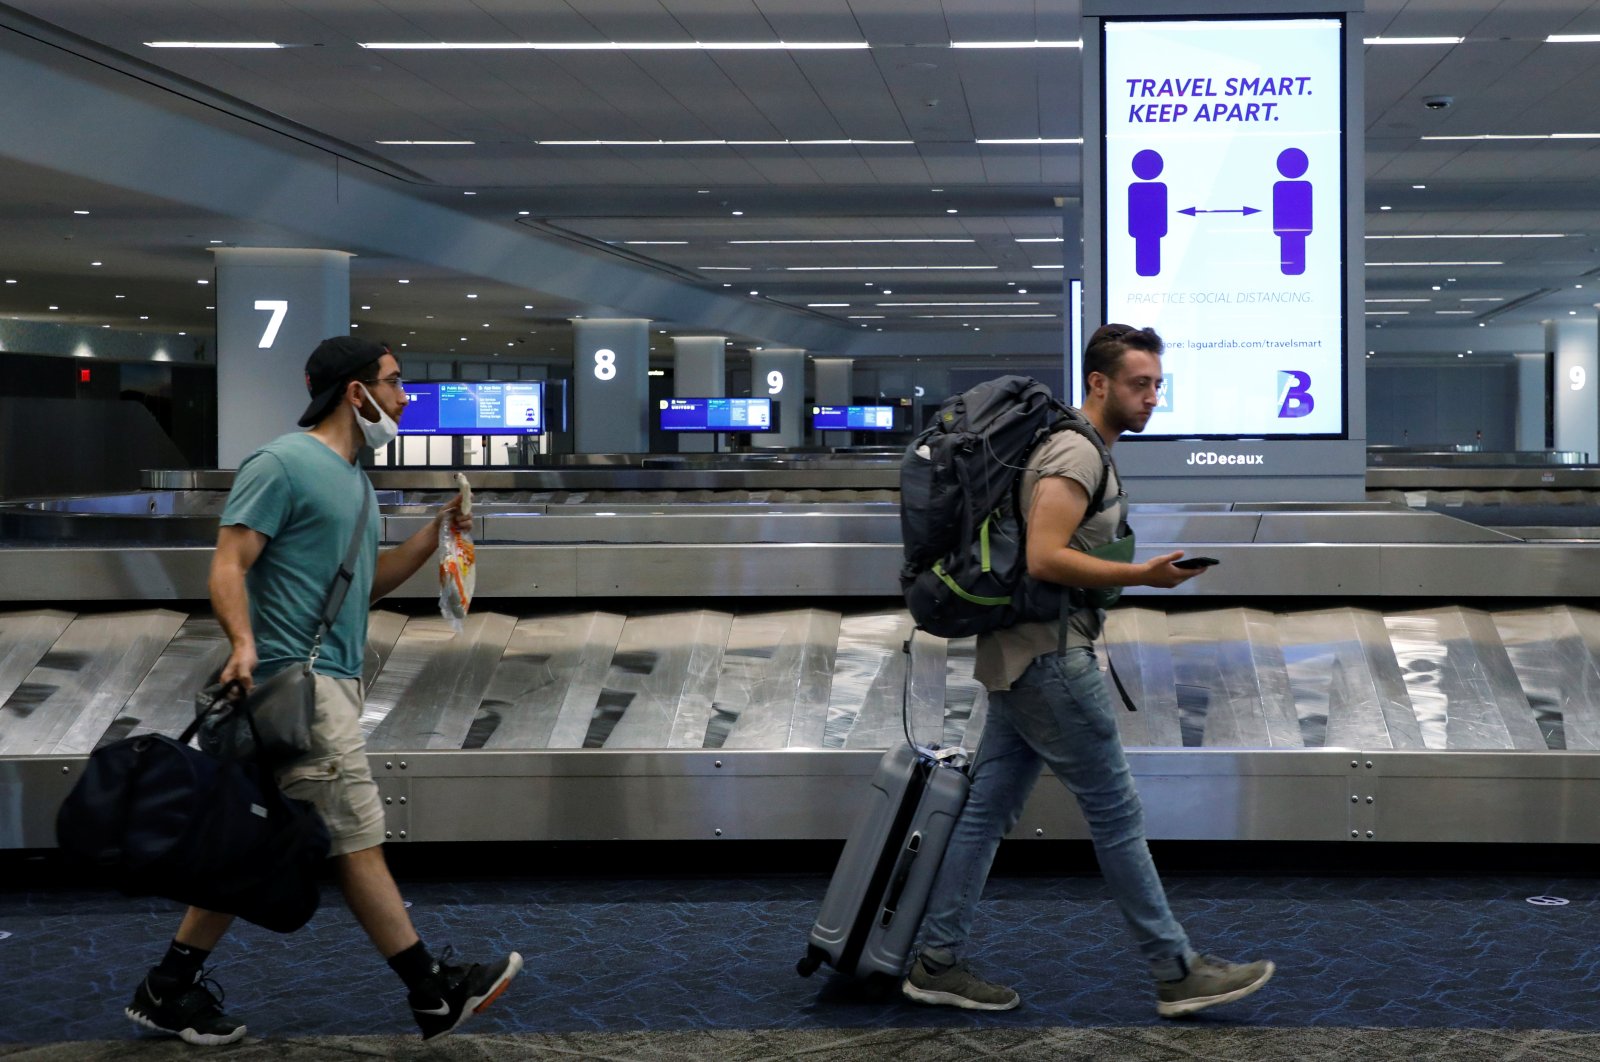 Travelers pass a sign alerting them to distance at LaGuardia Airport, during the outbreak of the coronavirus disease (COVID-19), in New York, U.S., June 29, 2020. (Reuters Photo)